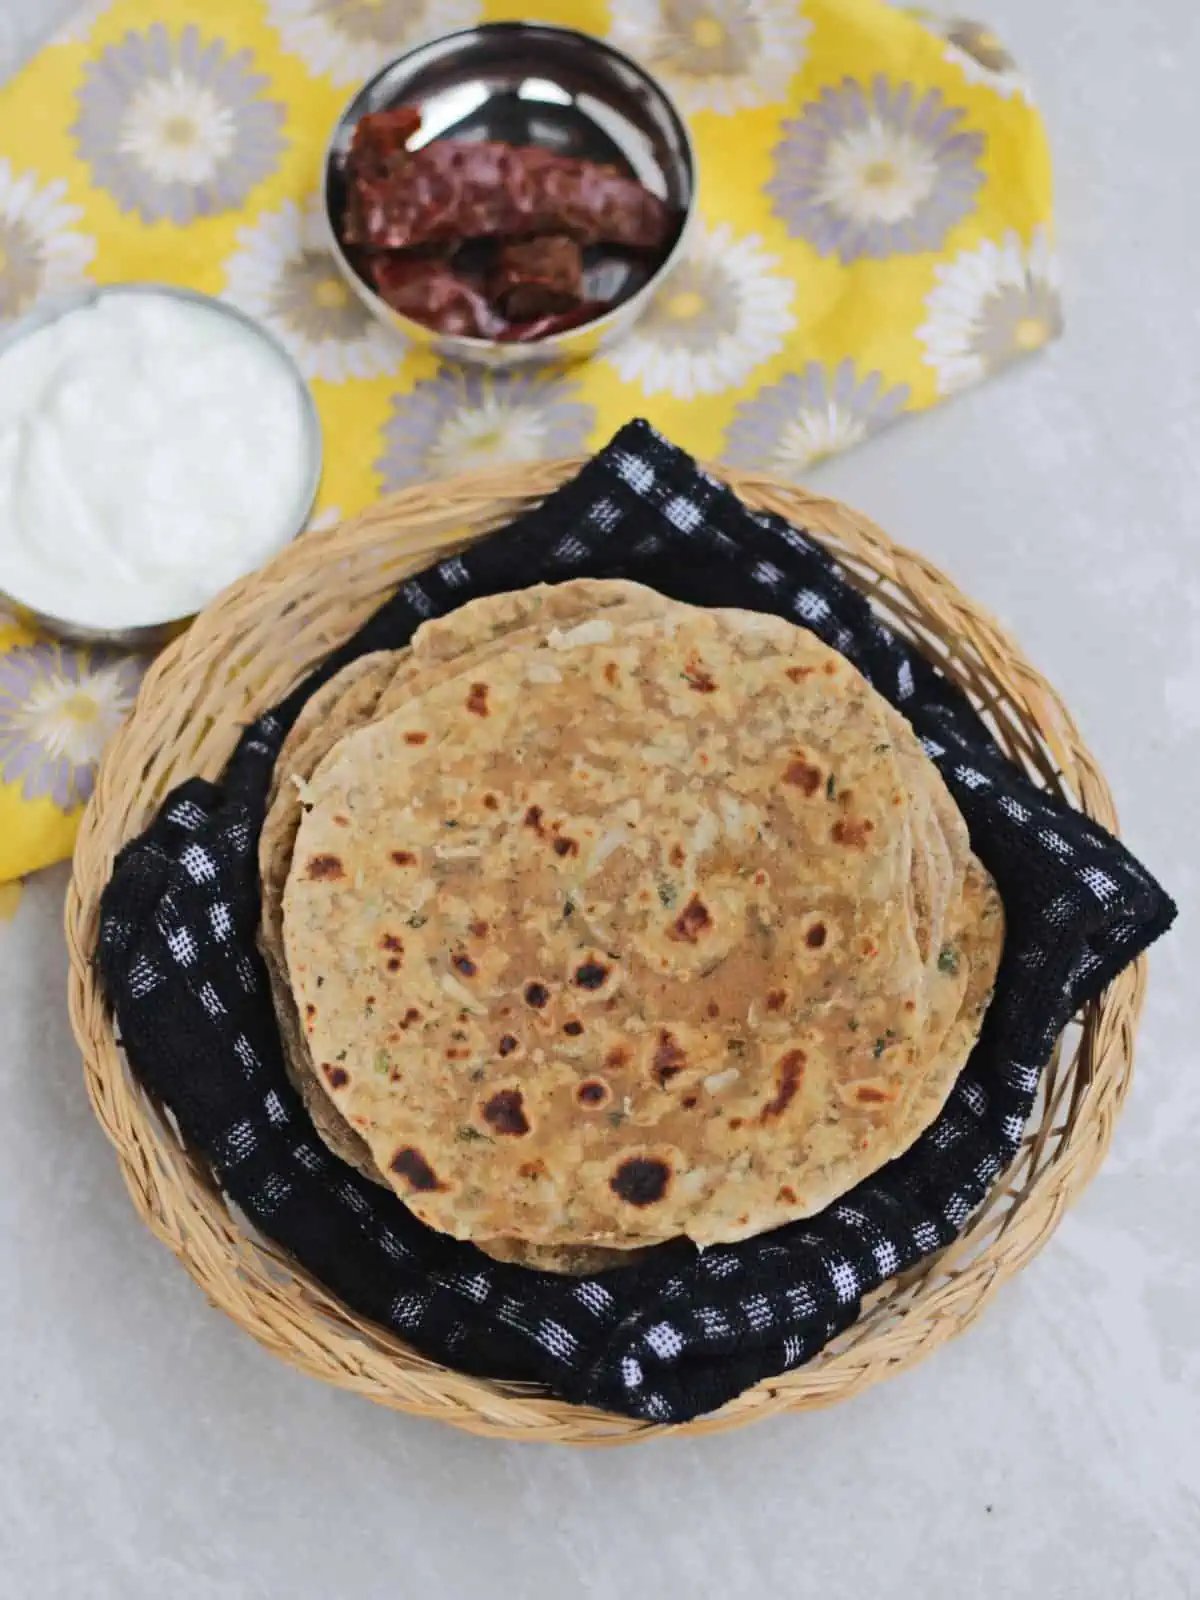 paratha layered in a basket with yogurt and pickle on the side.